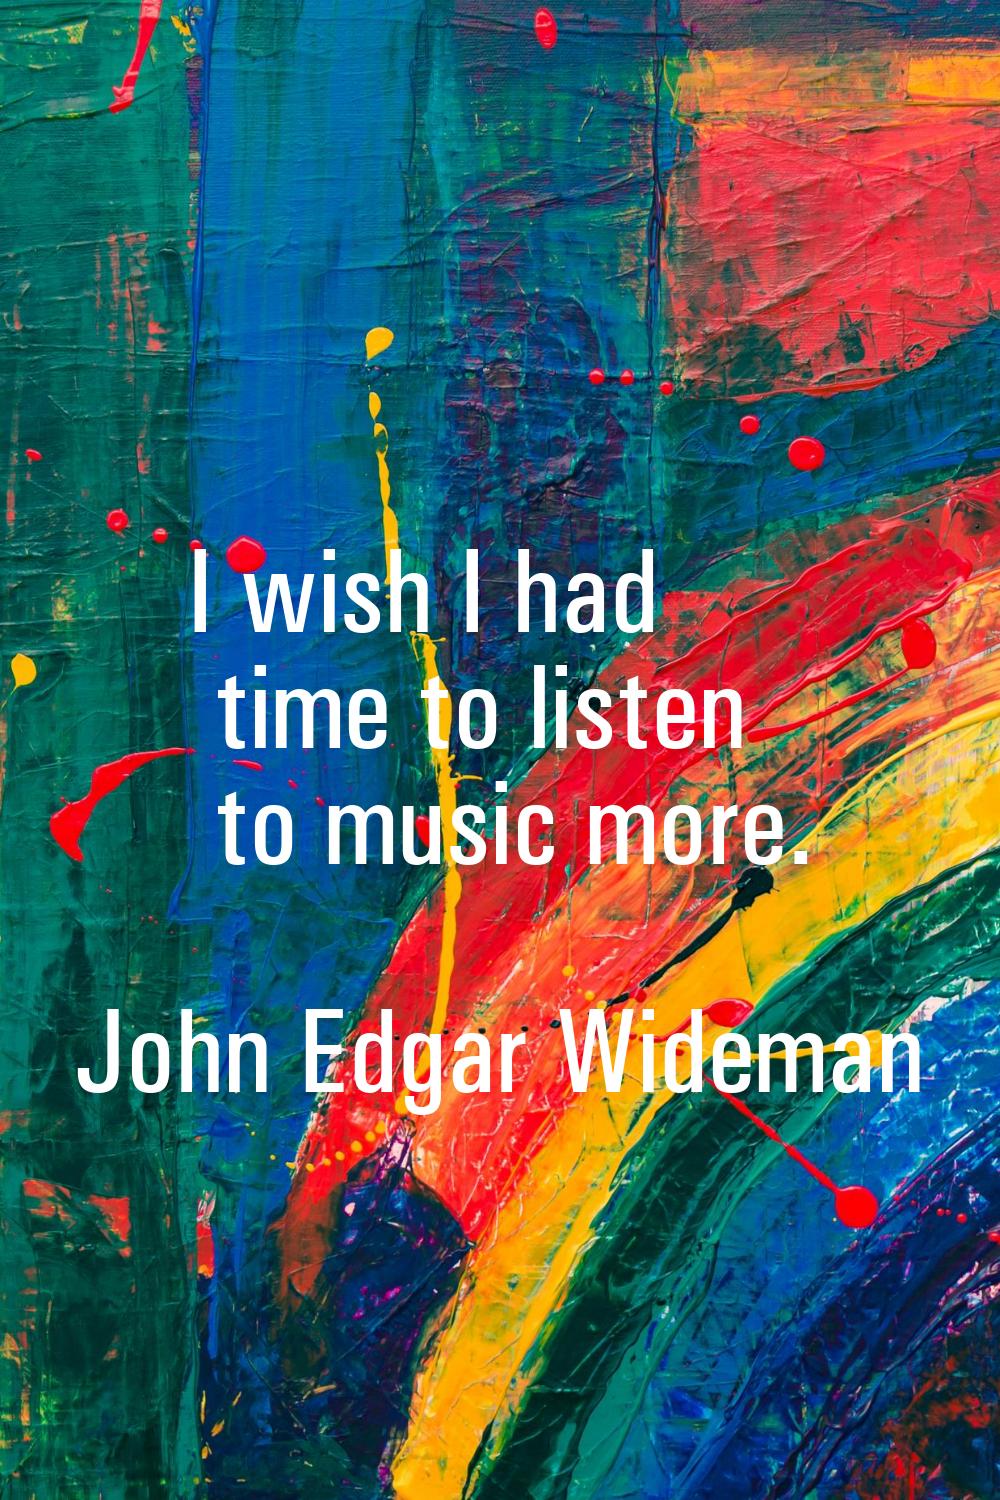 I wish I had time to listen to music more.